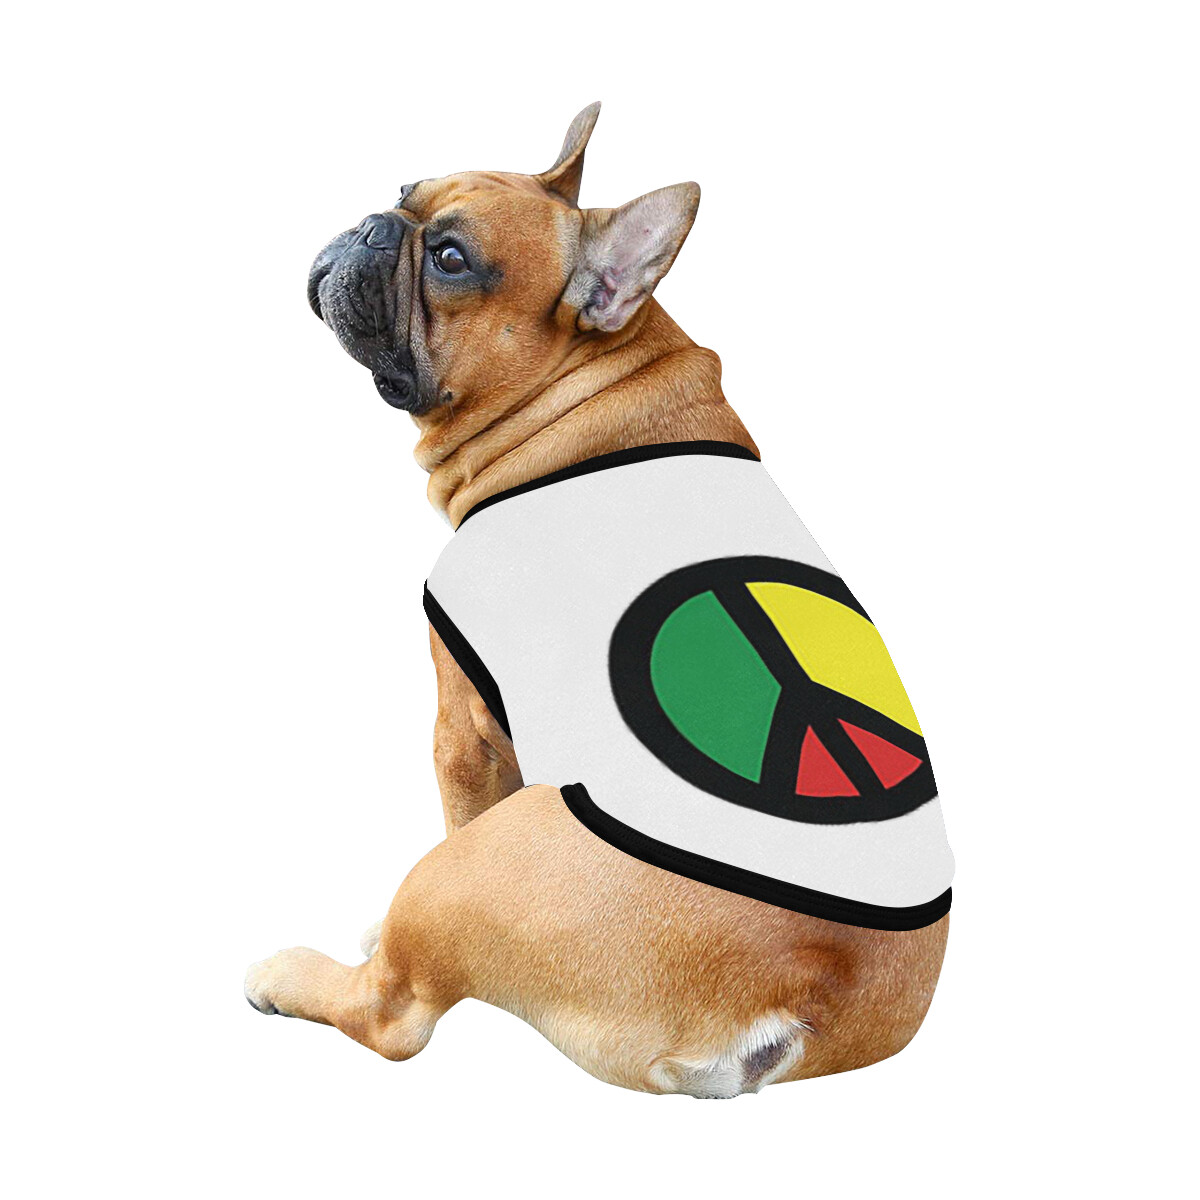 🐕 Rasta Peace sign Dog shirt, Dog Tank Top, Dog t-shirt, Dog clothes, Gifts, front back print, 7 sizes XS to 3XL, dog gifts, white